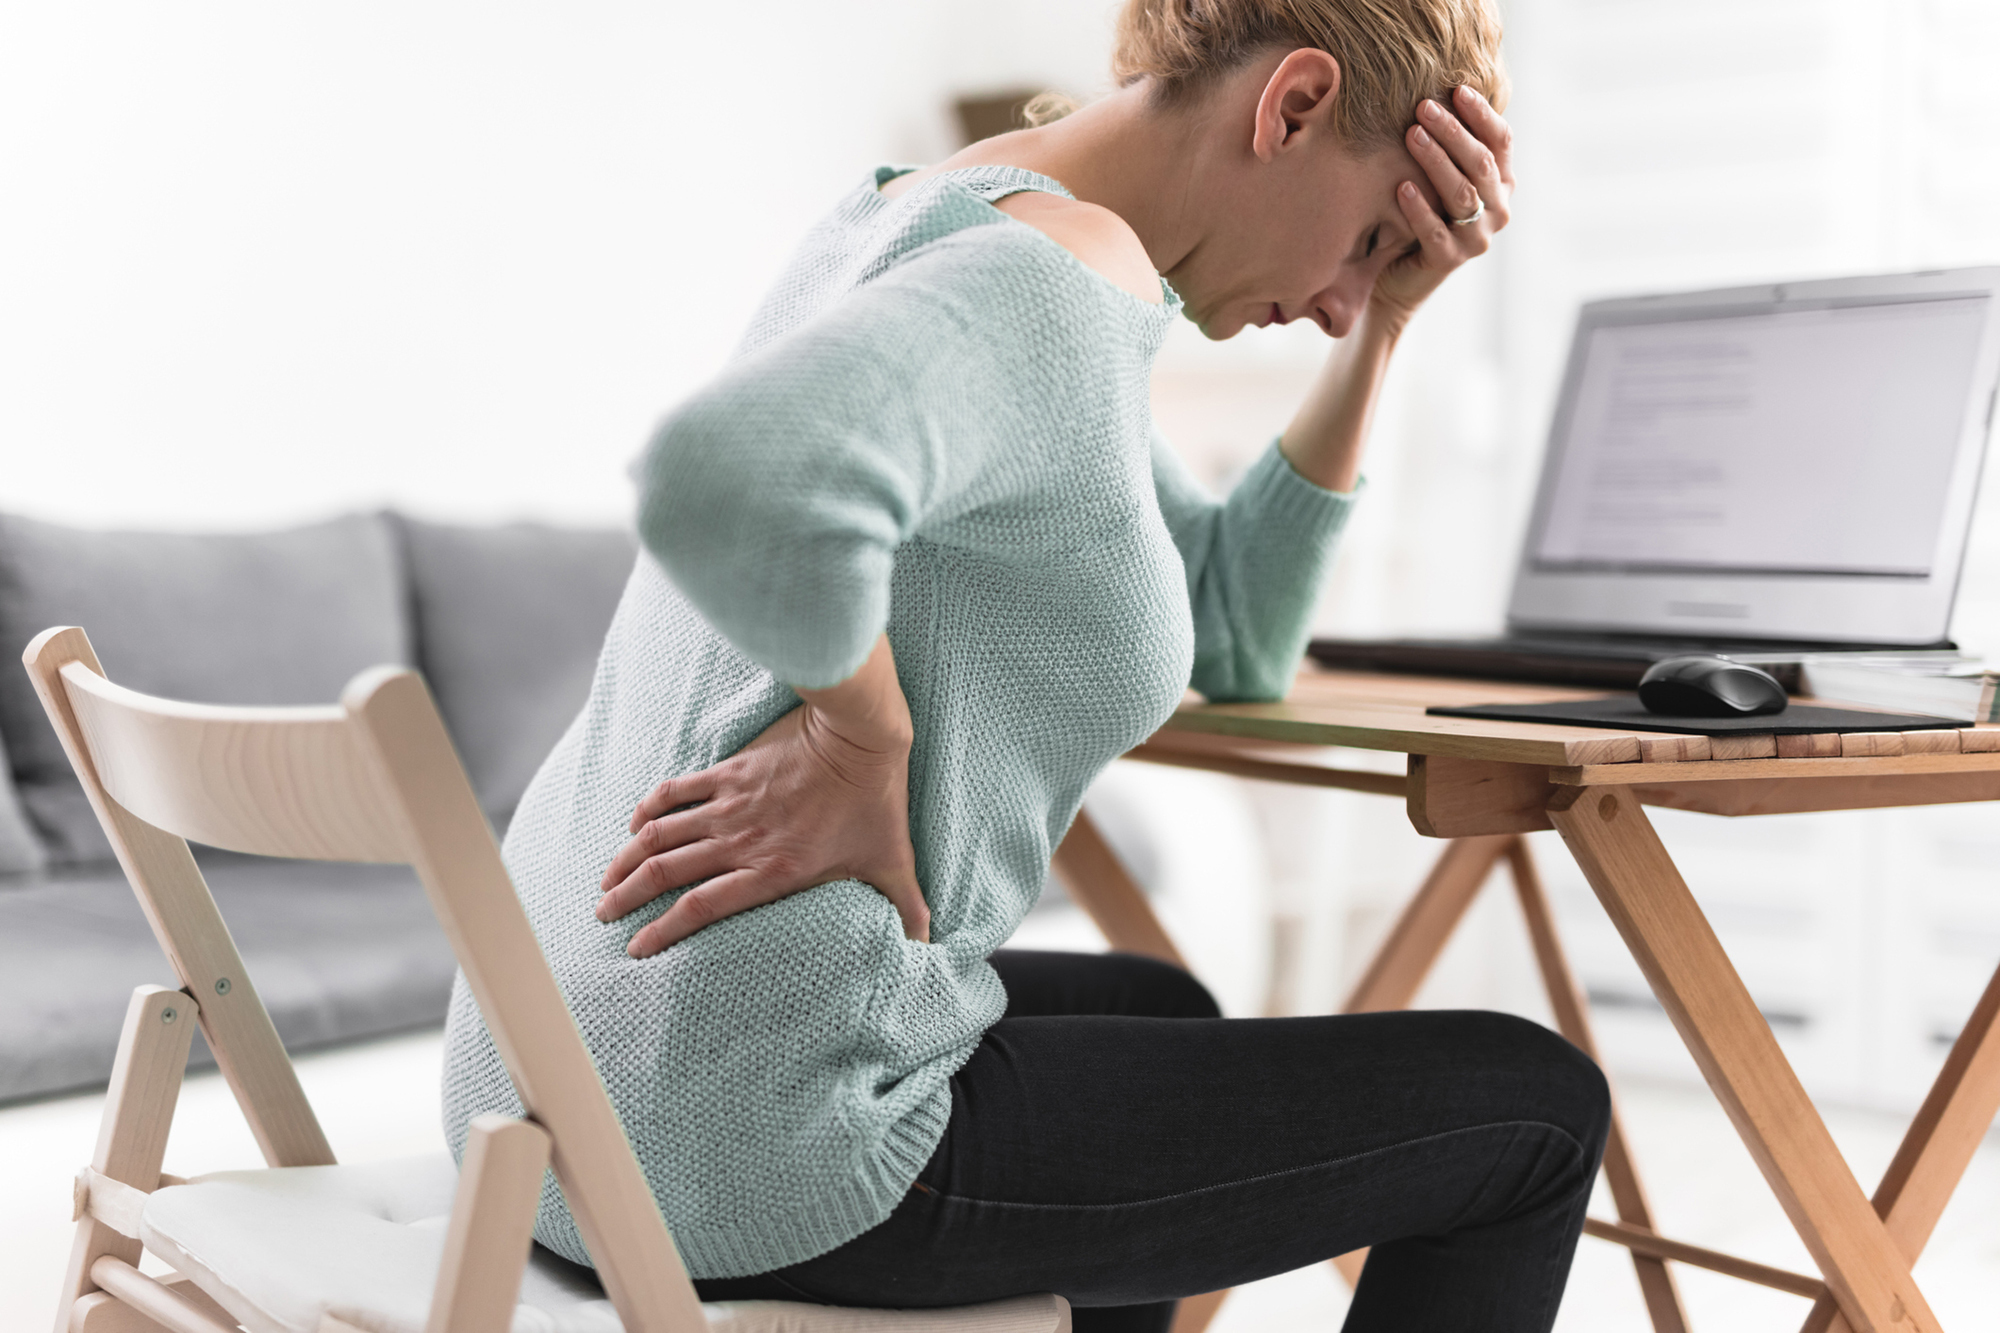 Exercises for back pain issues